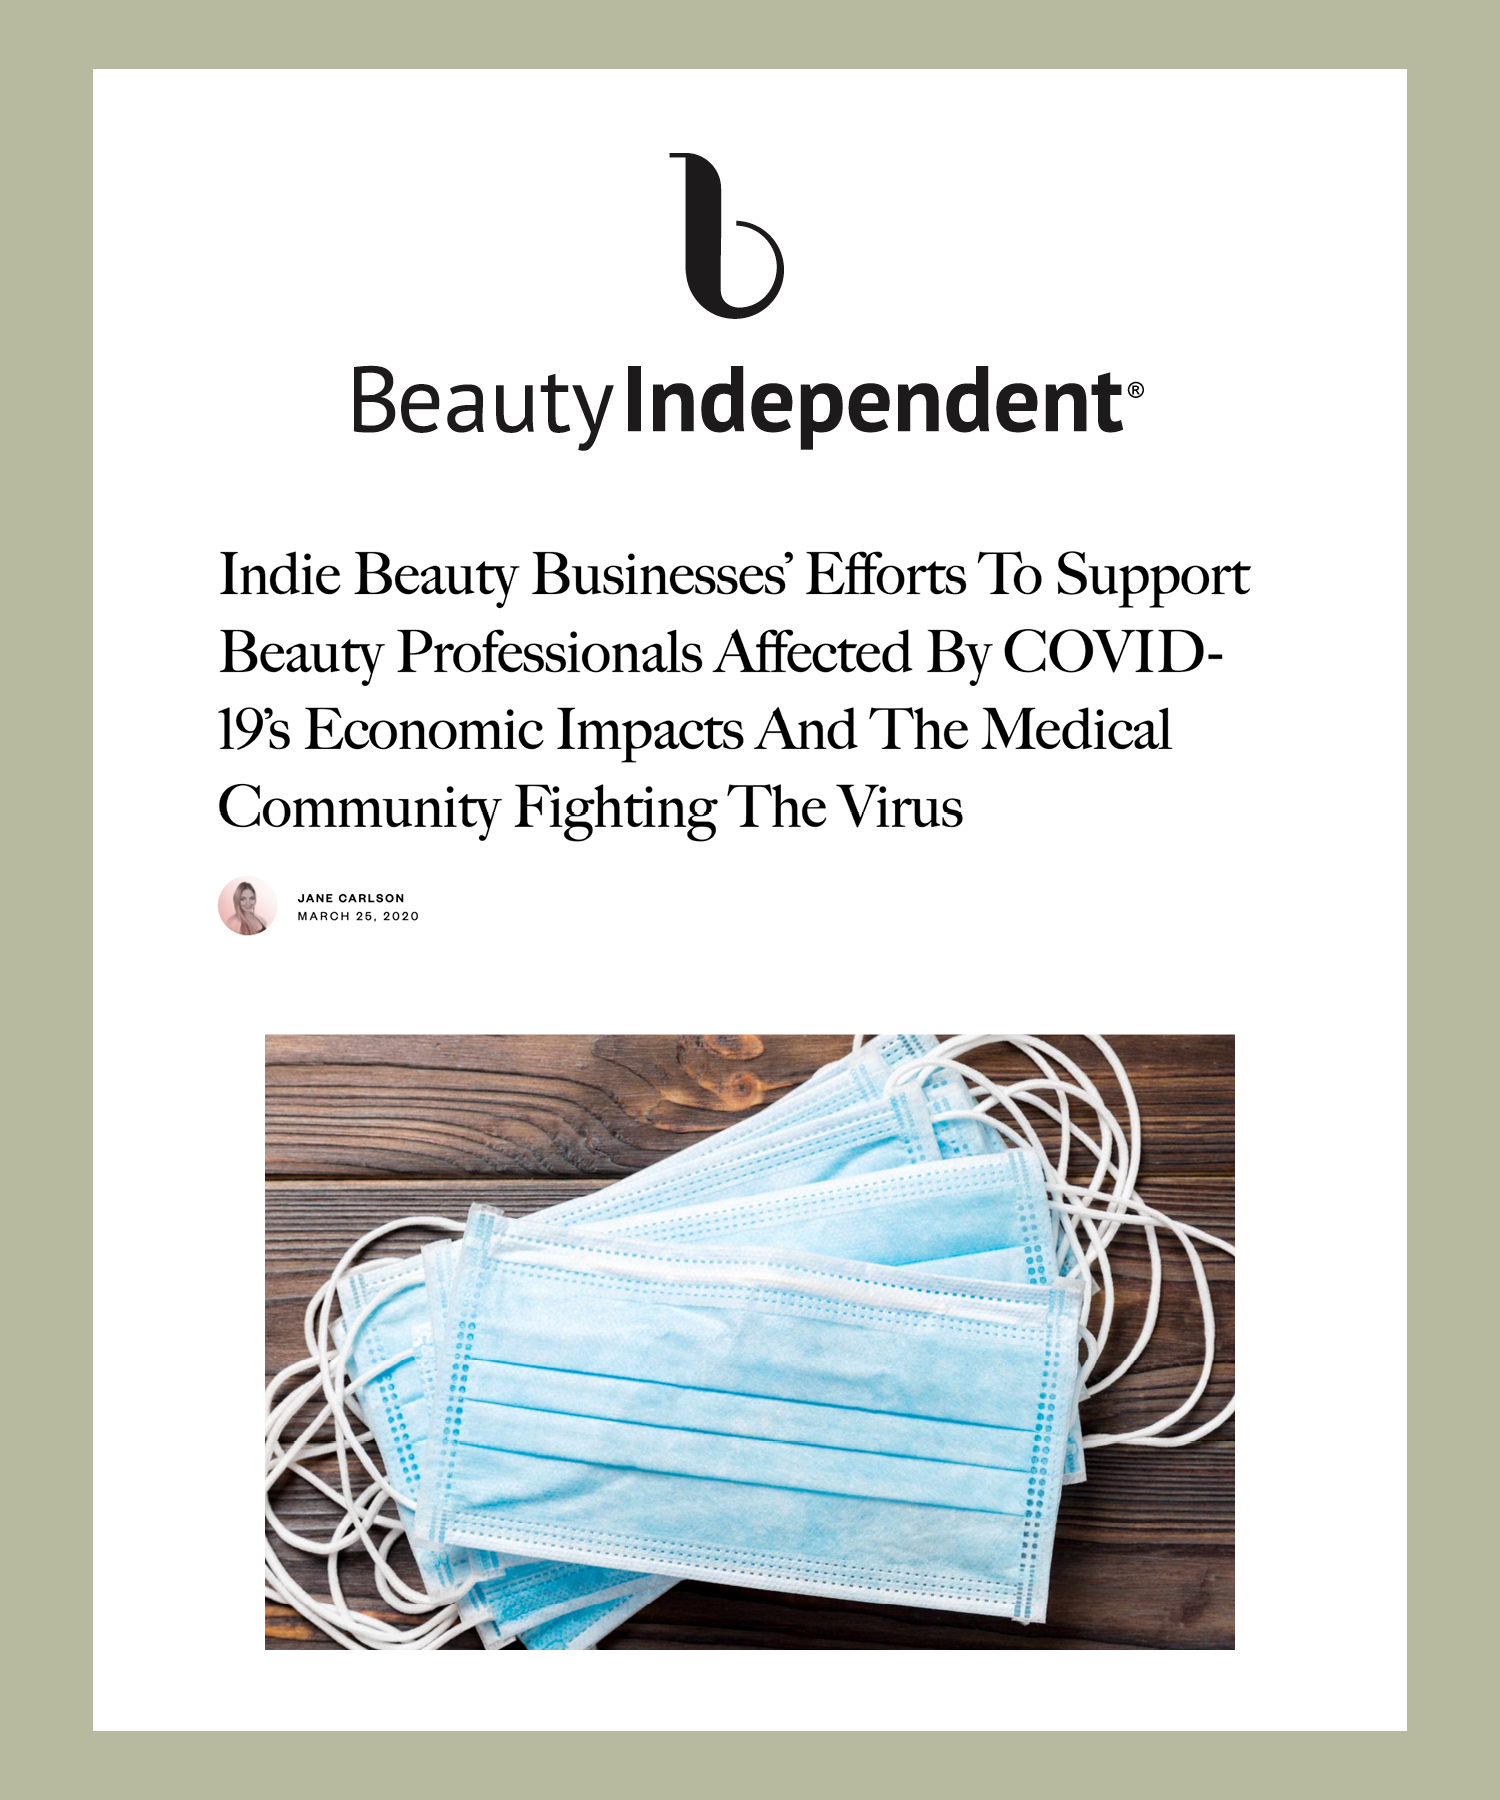 Indie Beauty Businesses’ Efforts To Support Beauty Professionals Affected By COVID-19’s Economic Impacts And The Medical Community Fighting The Virus